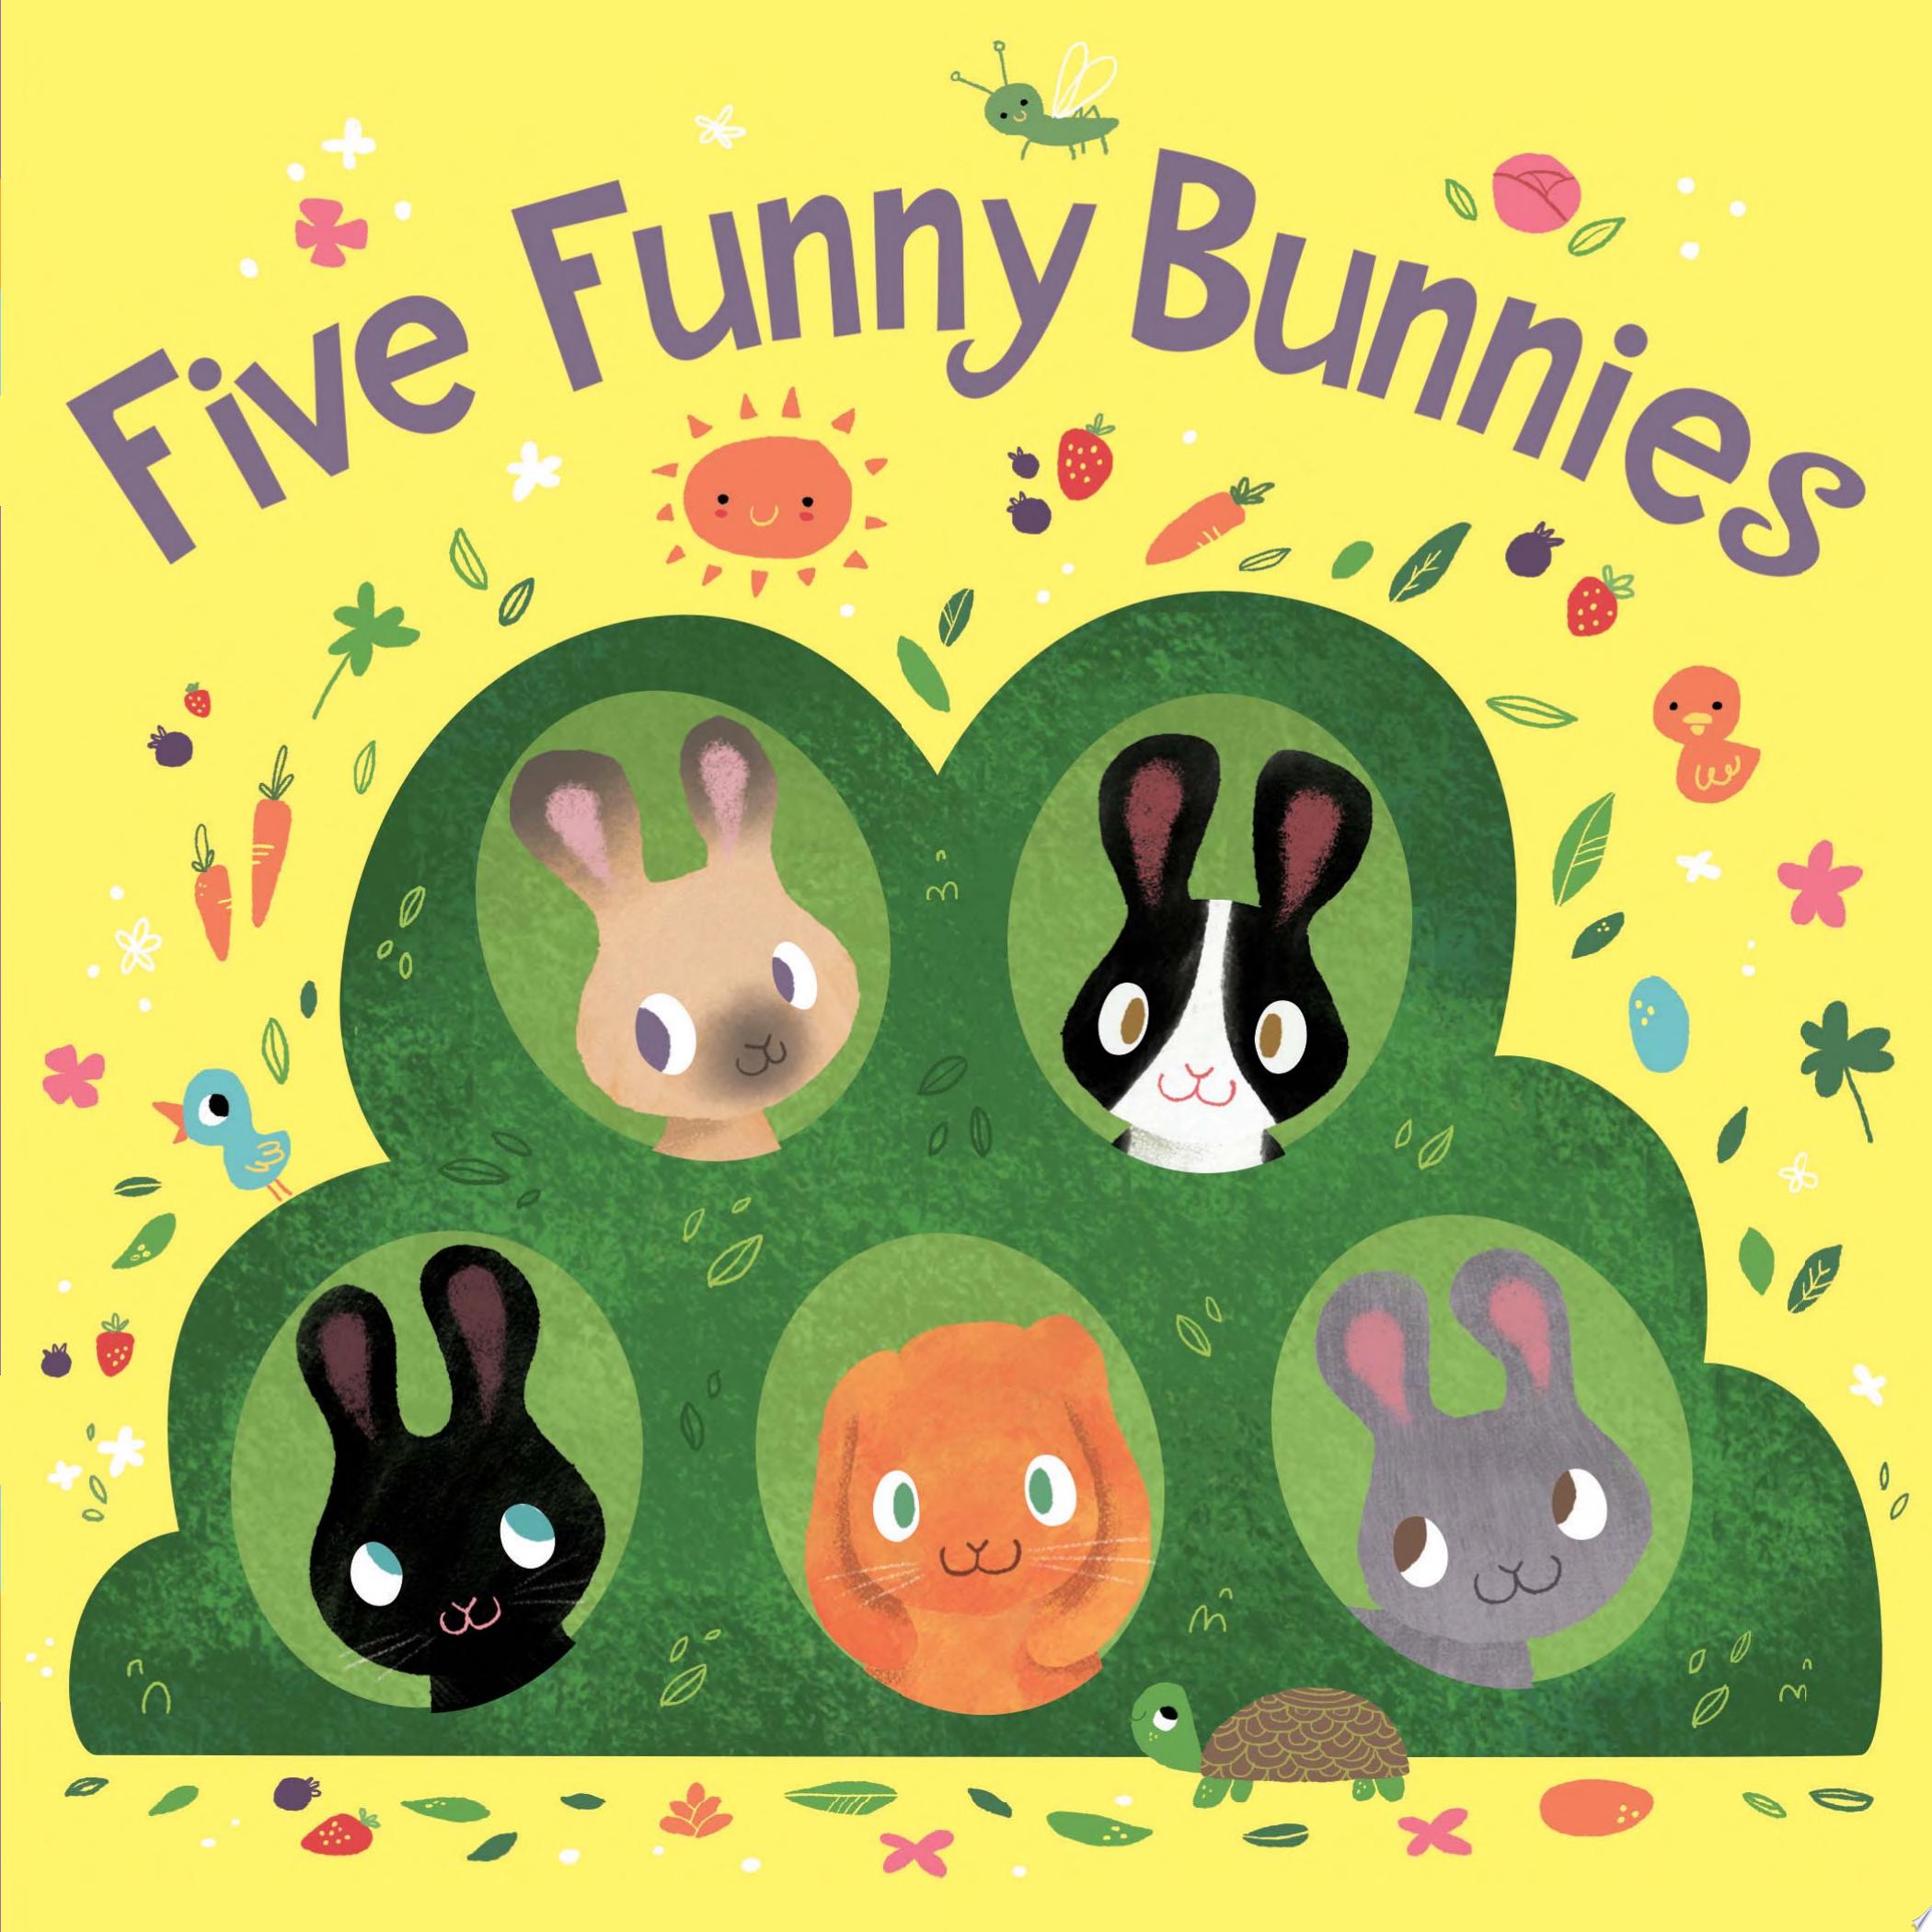 Image for "Five Funny Bunnies"